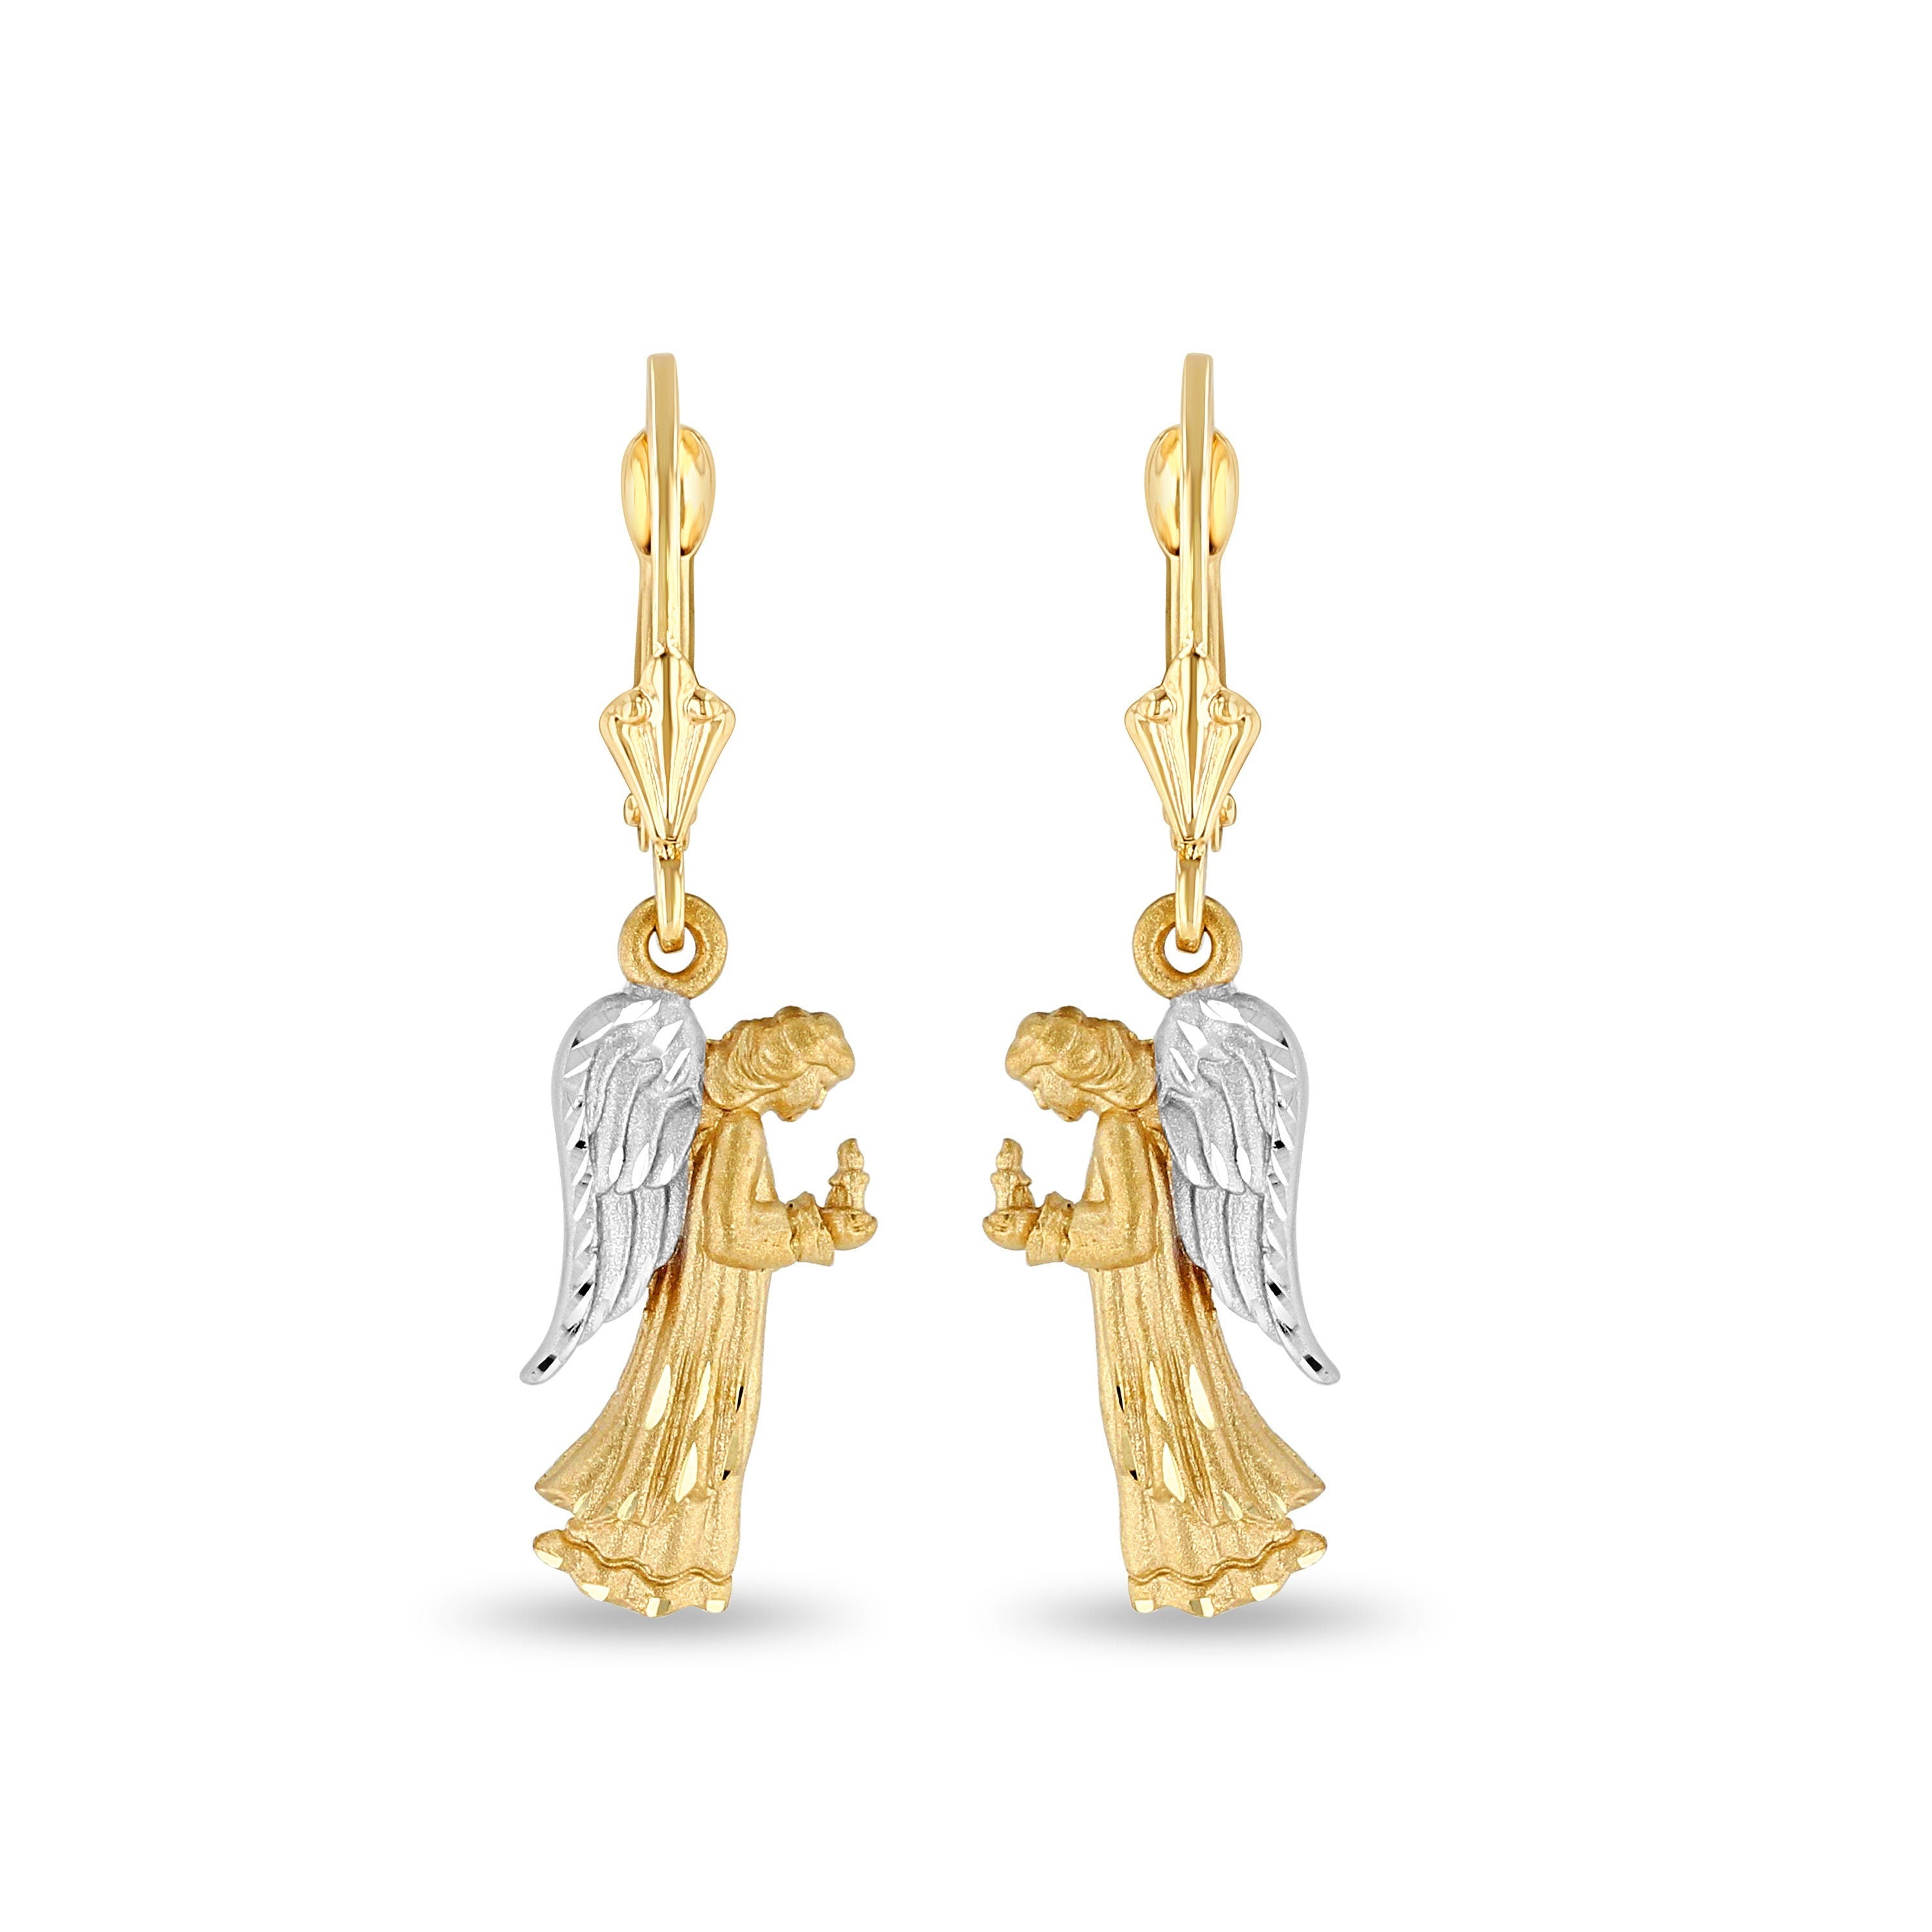 14k solid gold two tone angel holding candle lever back drop earrings